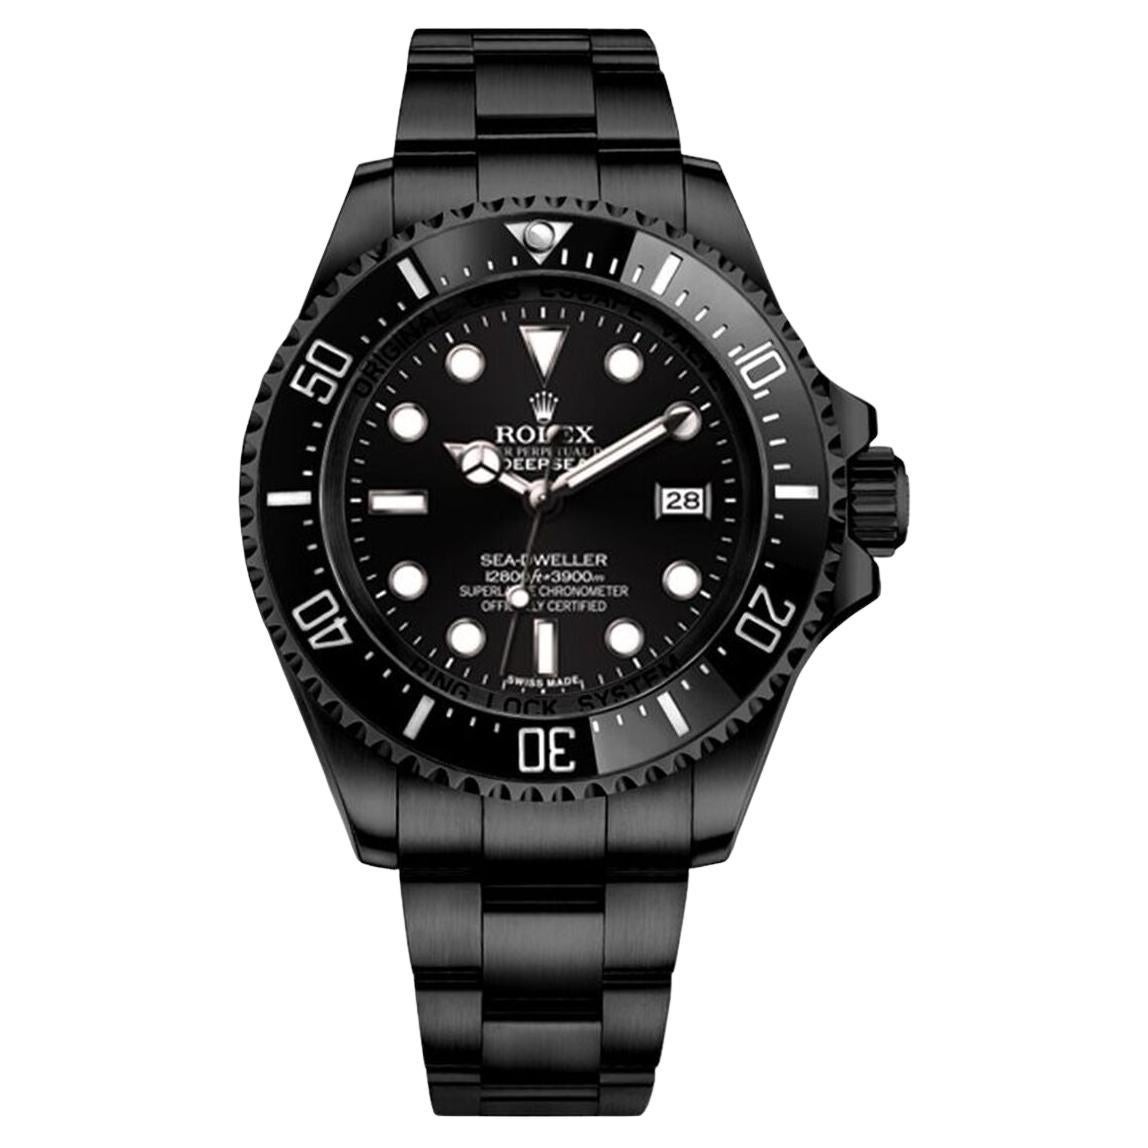 Rolex Sea-Dweller Deepsea PVD/DLC Coated Stainless Steel Watch 116660 For Sale